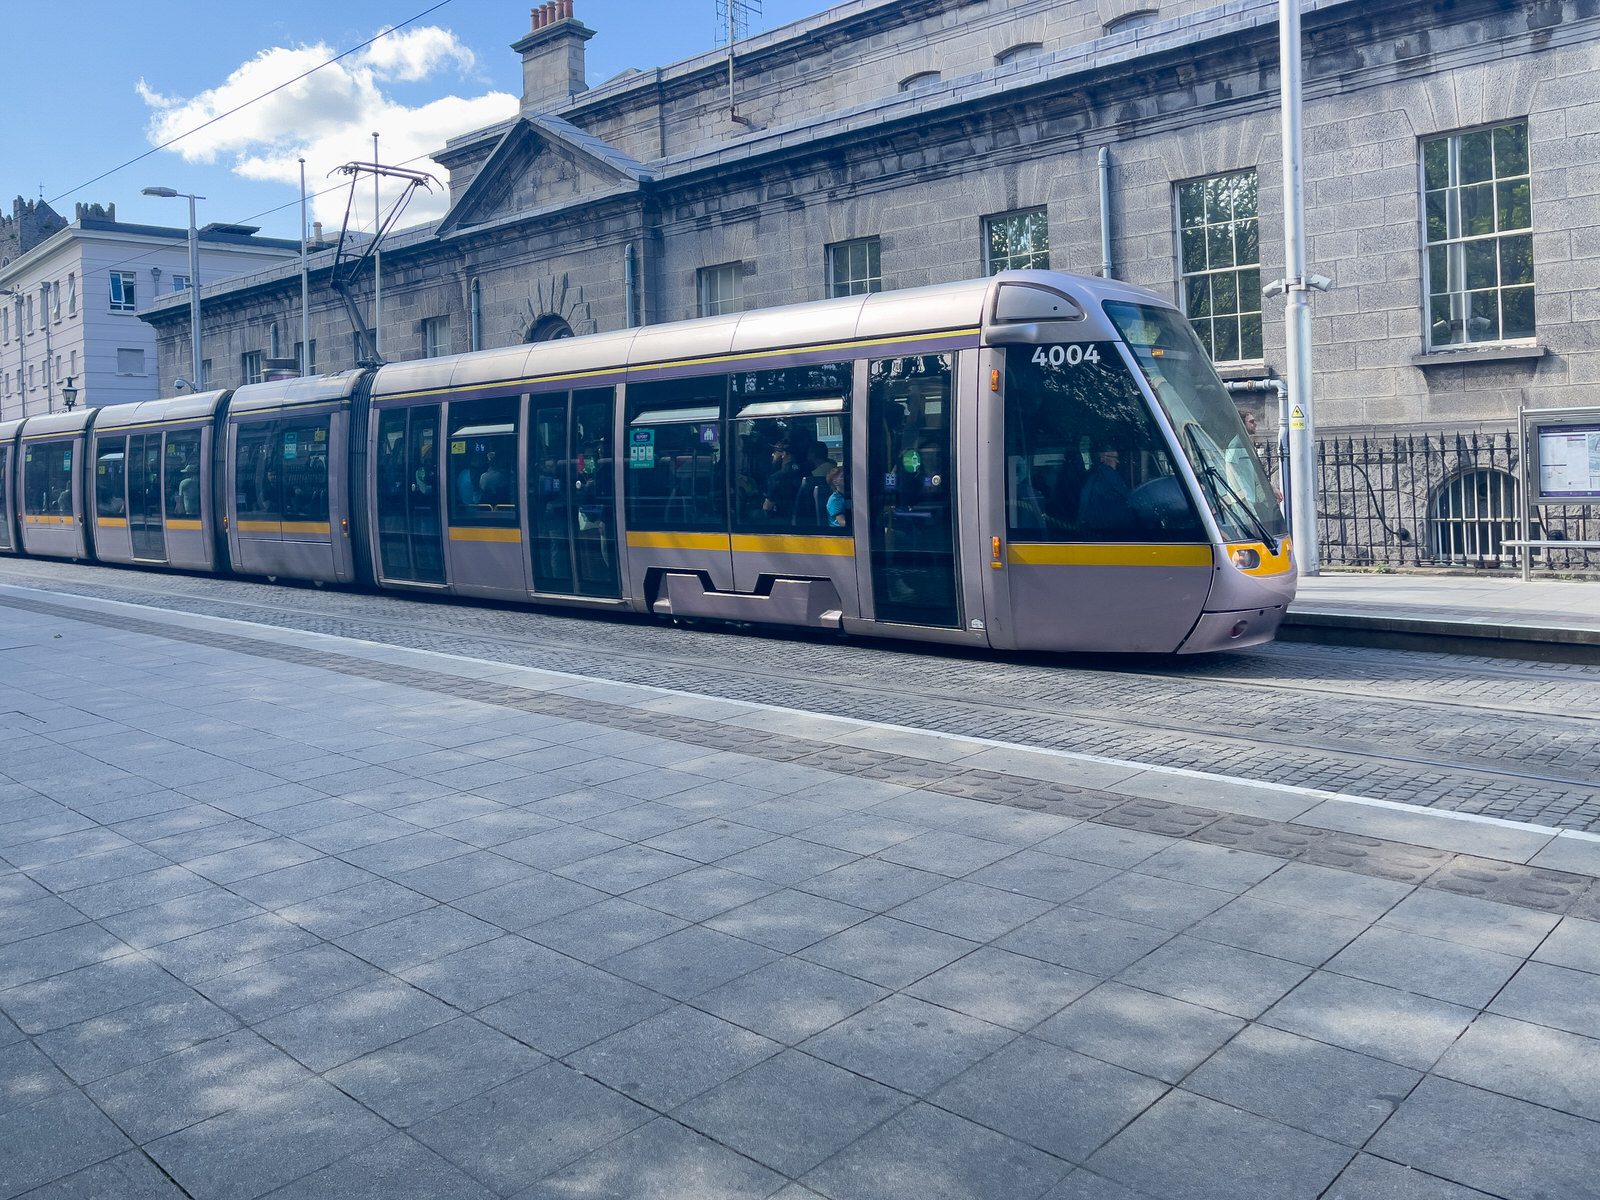 THE LUAS FOUR COURTS TRAM STOP [THERE IS MUCH TO BE SEEN HERE]-234103-1